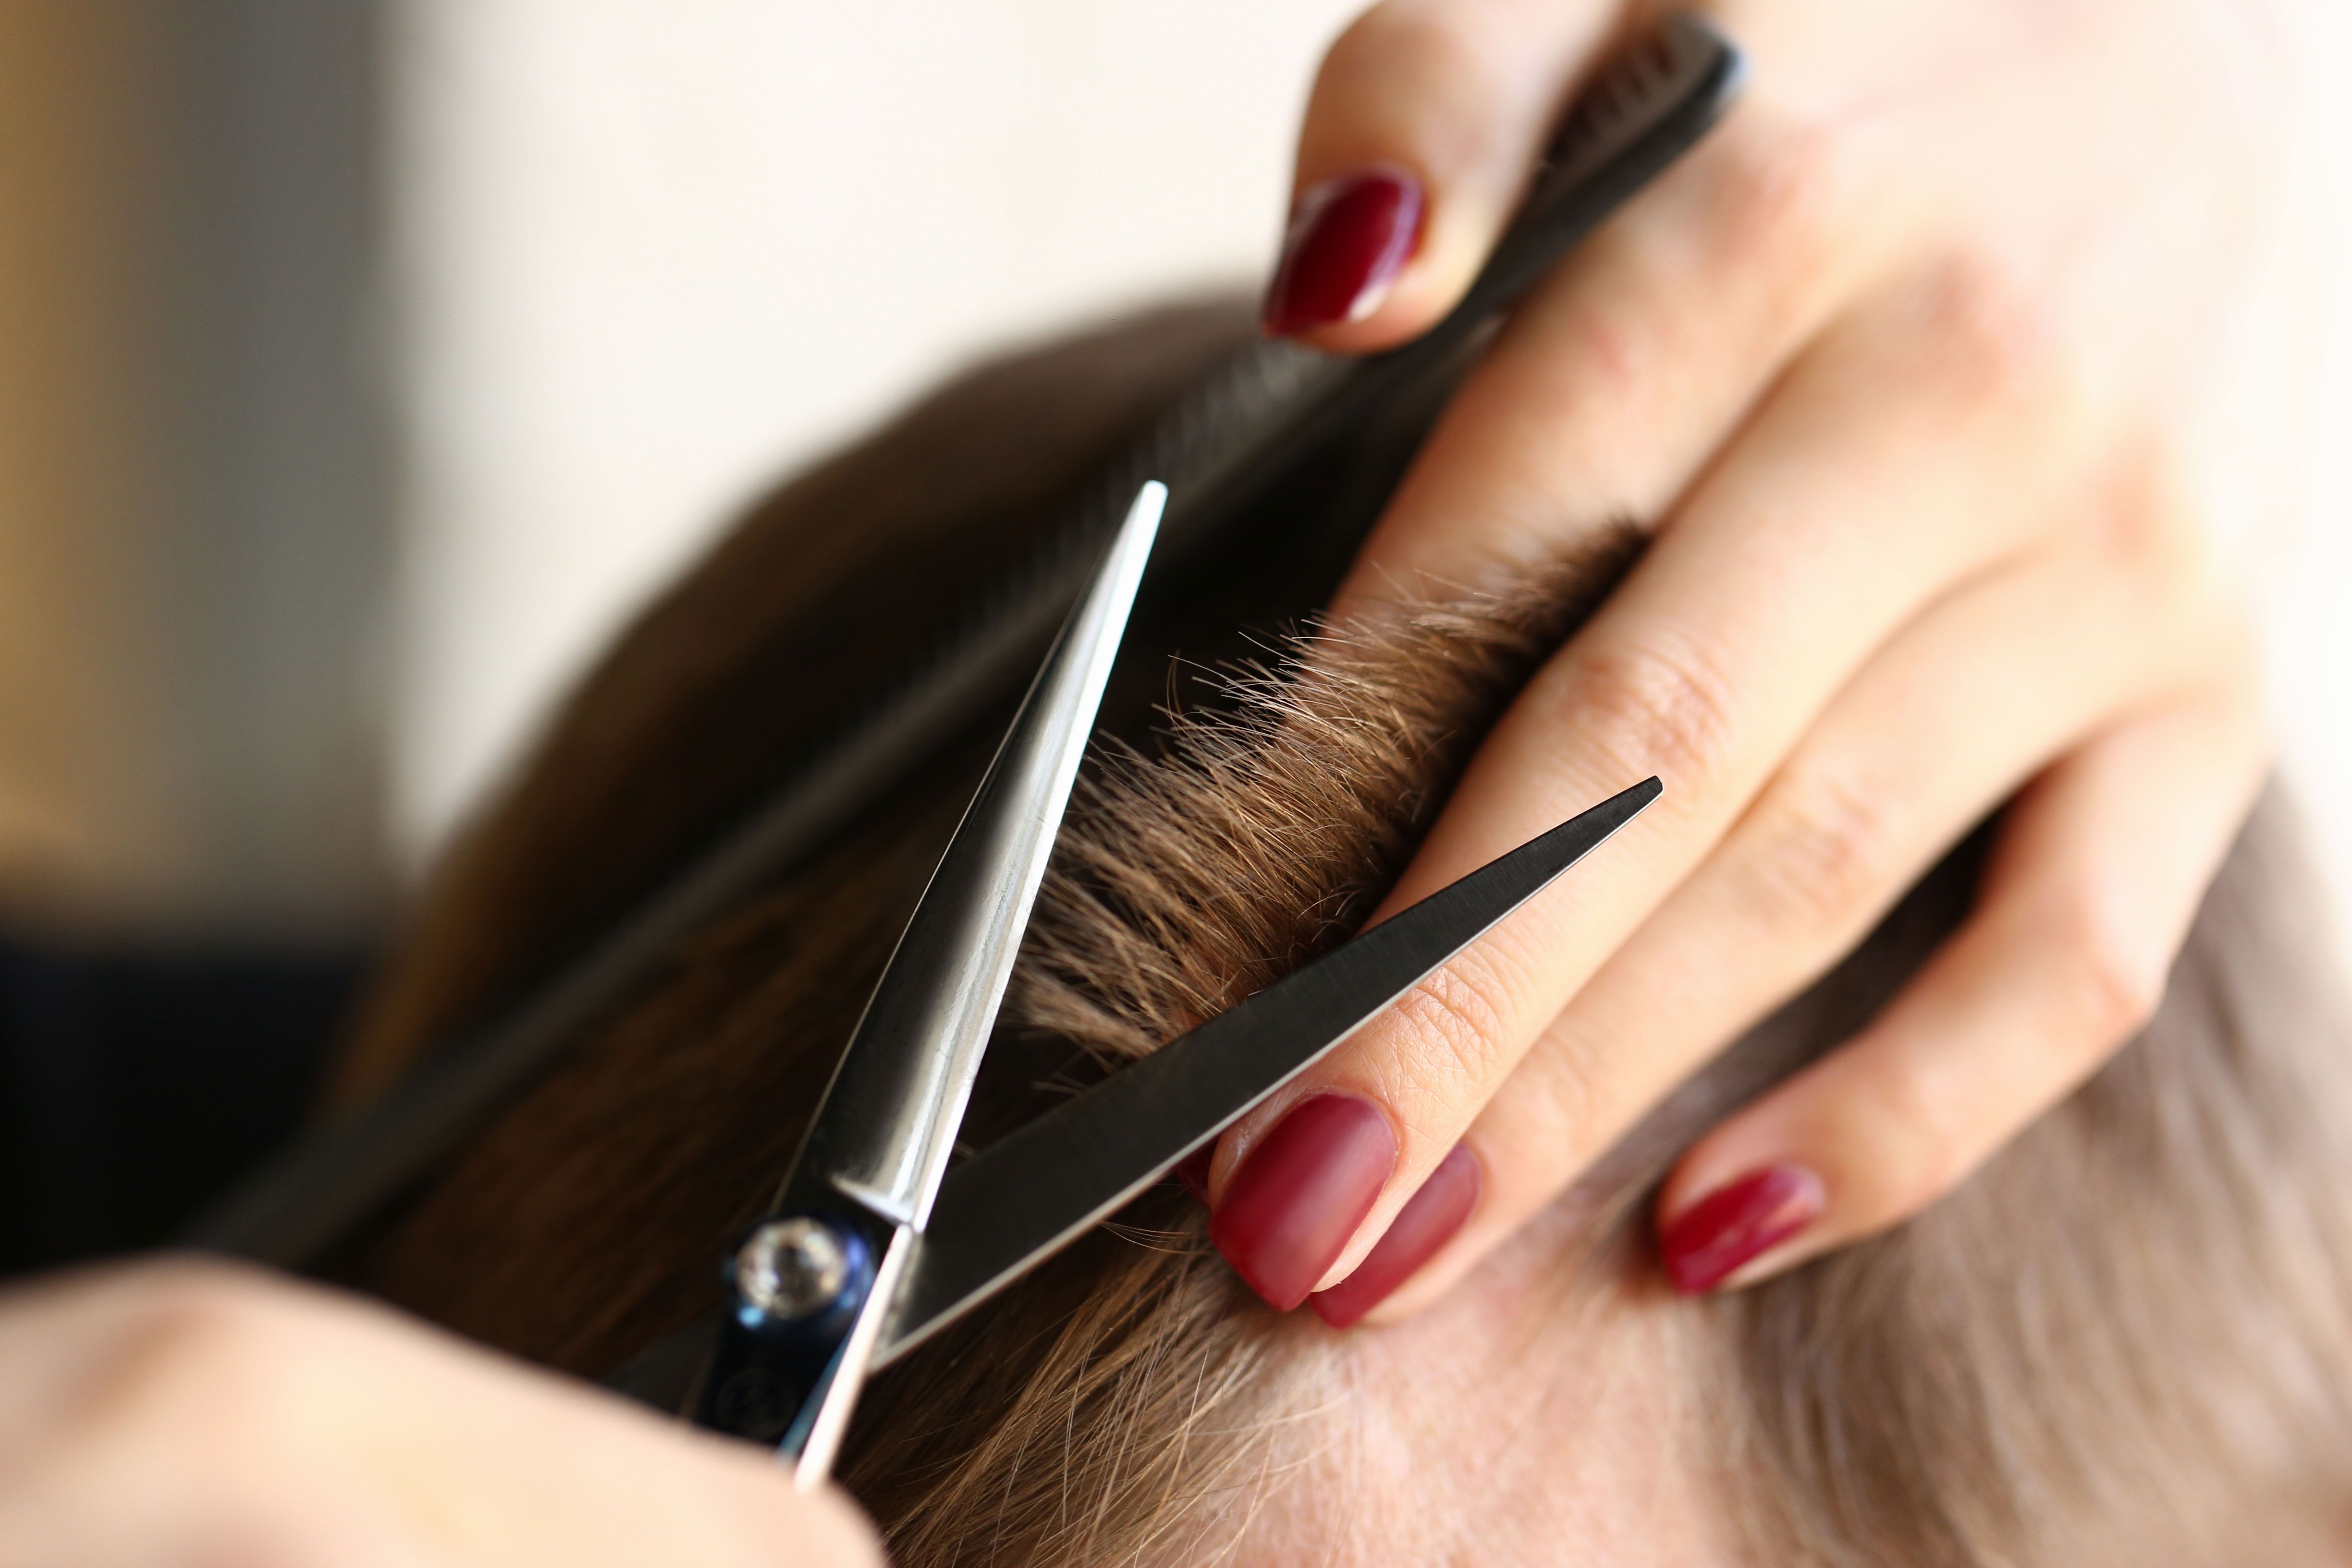 How to Cut Your Own Hair - Hairstylist Tips to Trim Your Hair at Home